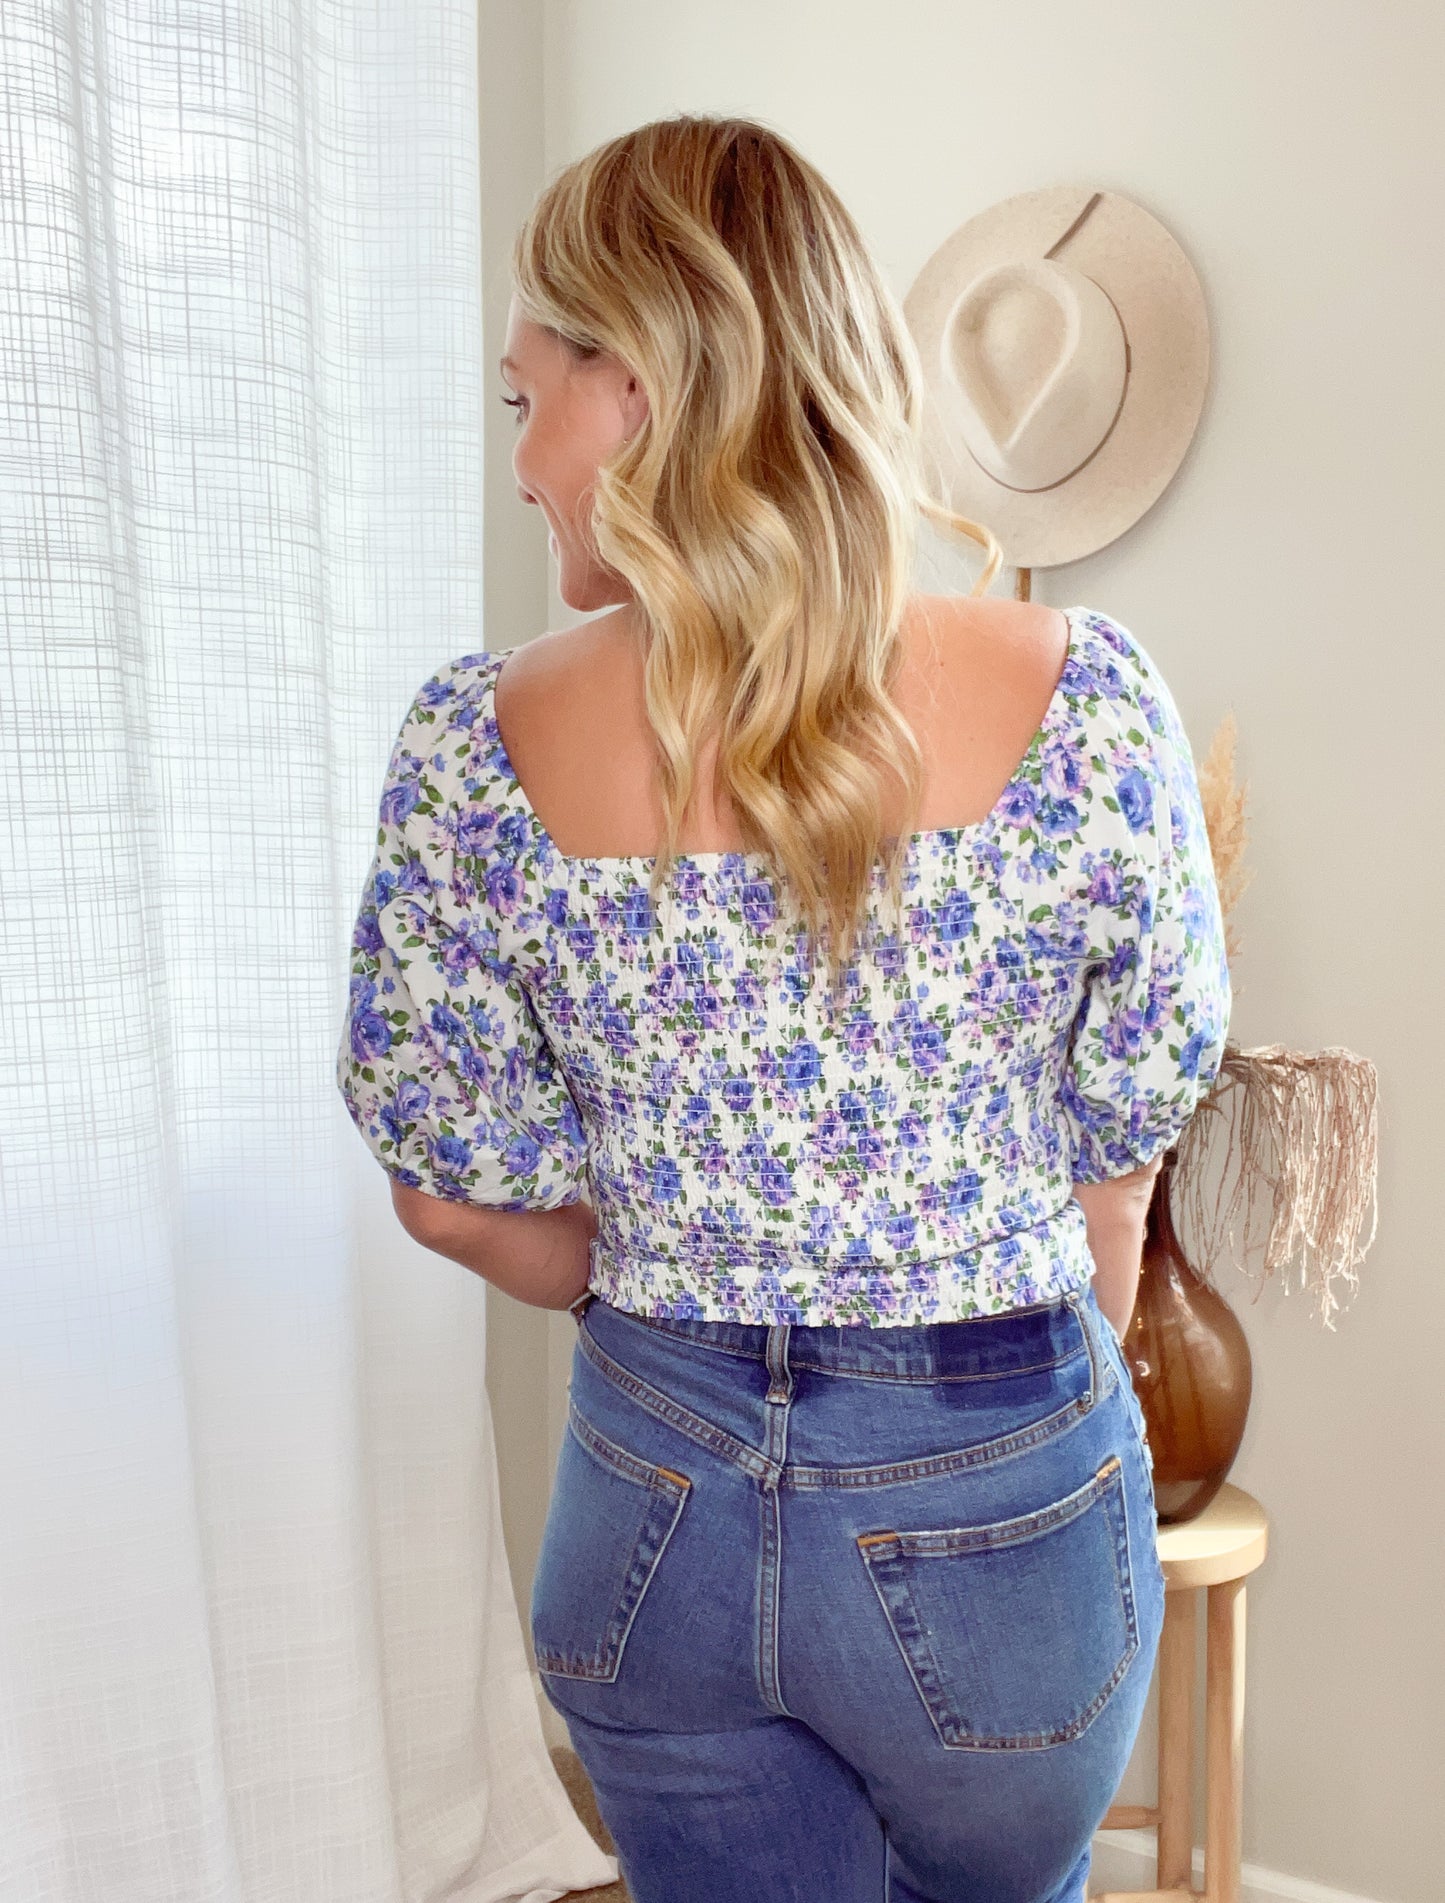 The Blue Floral Top